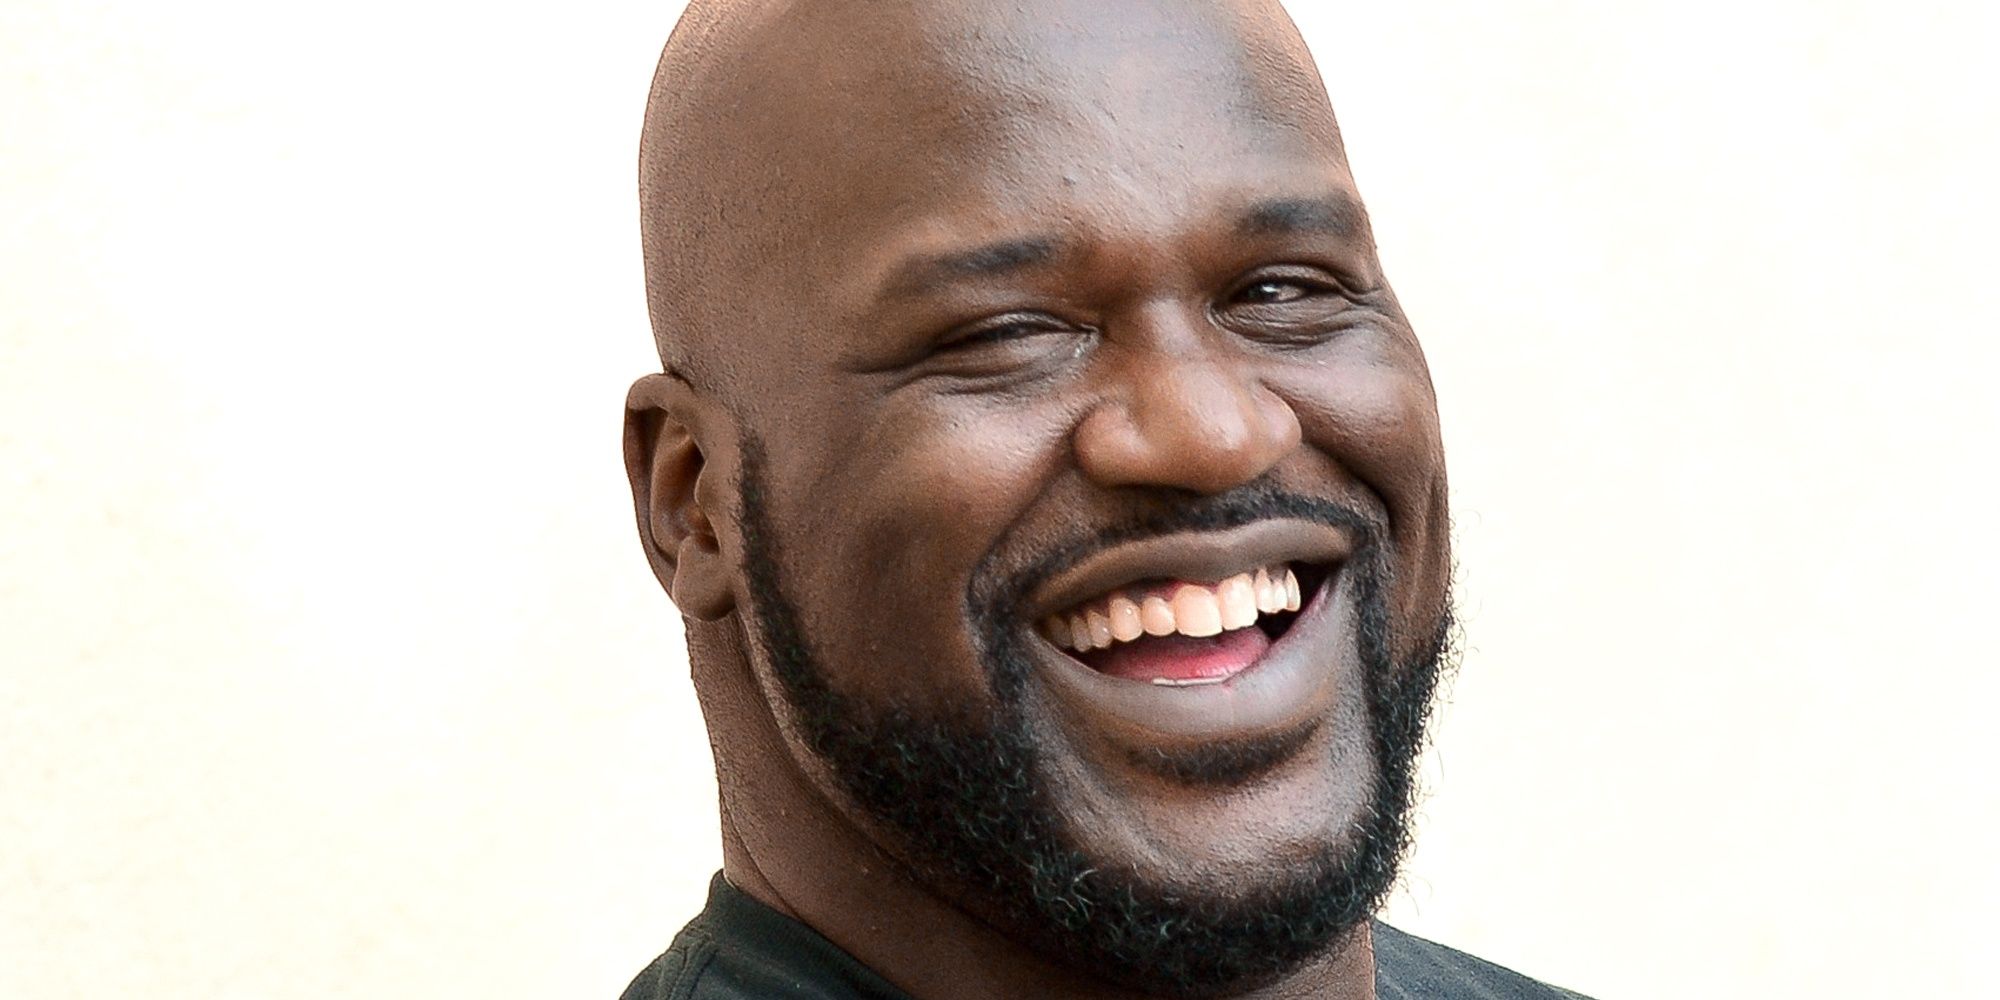 shaquille o'neal